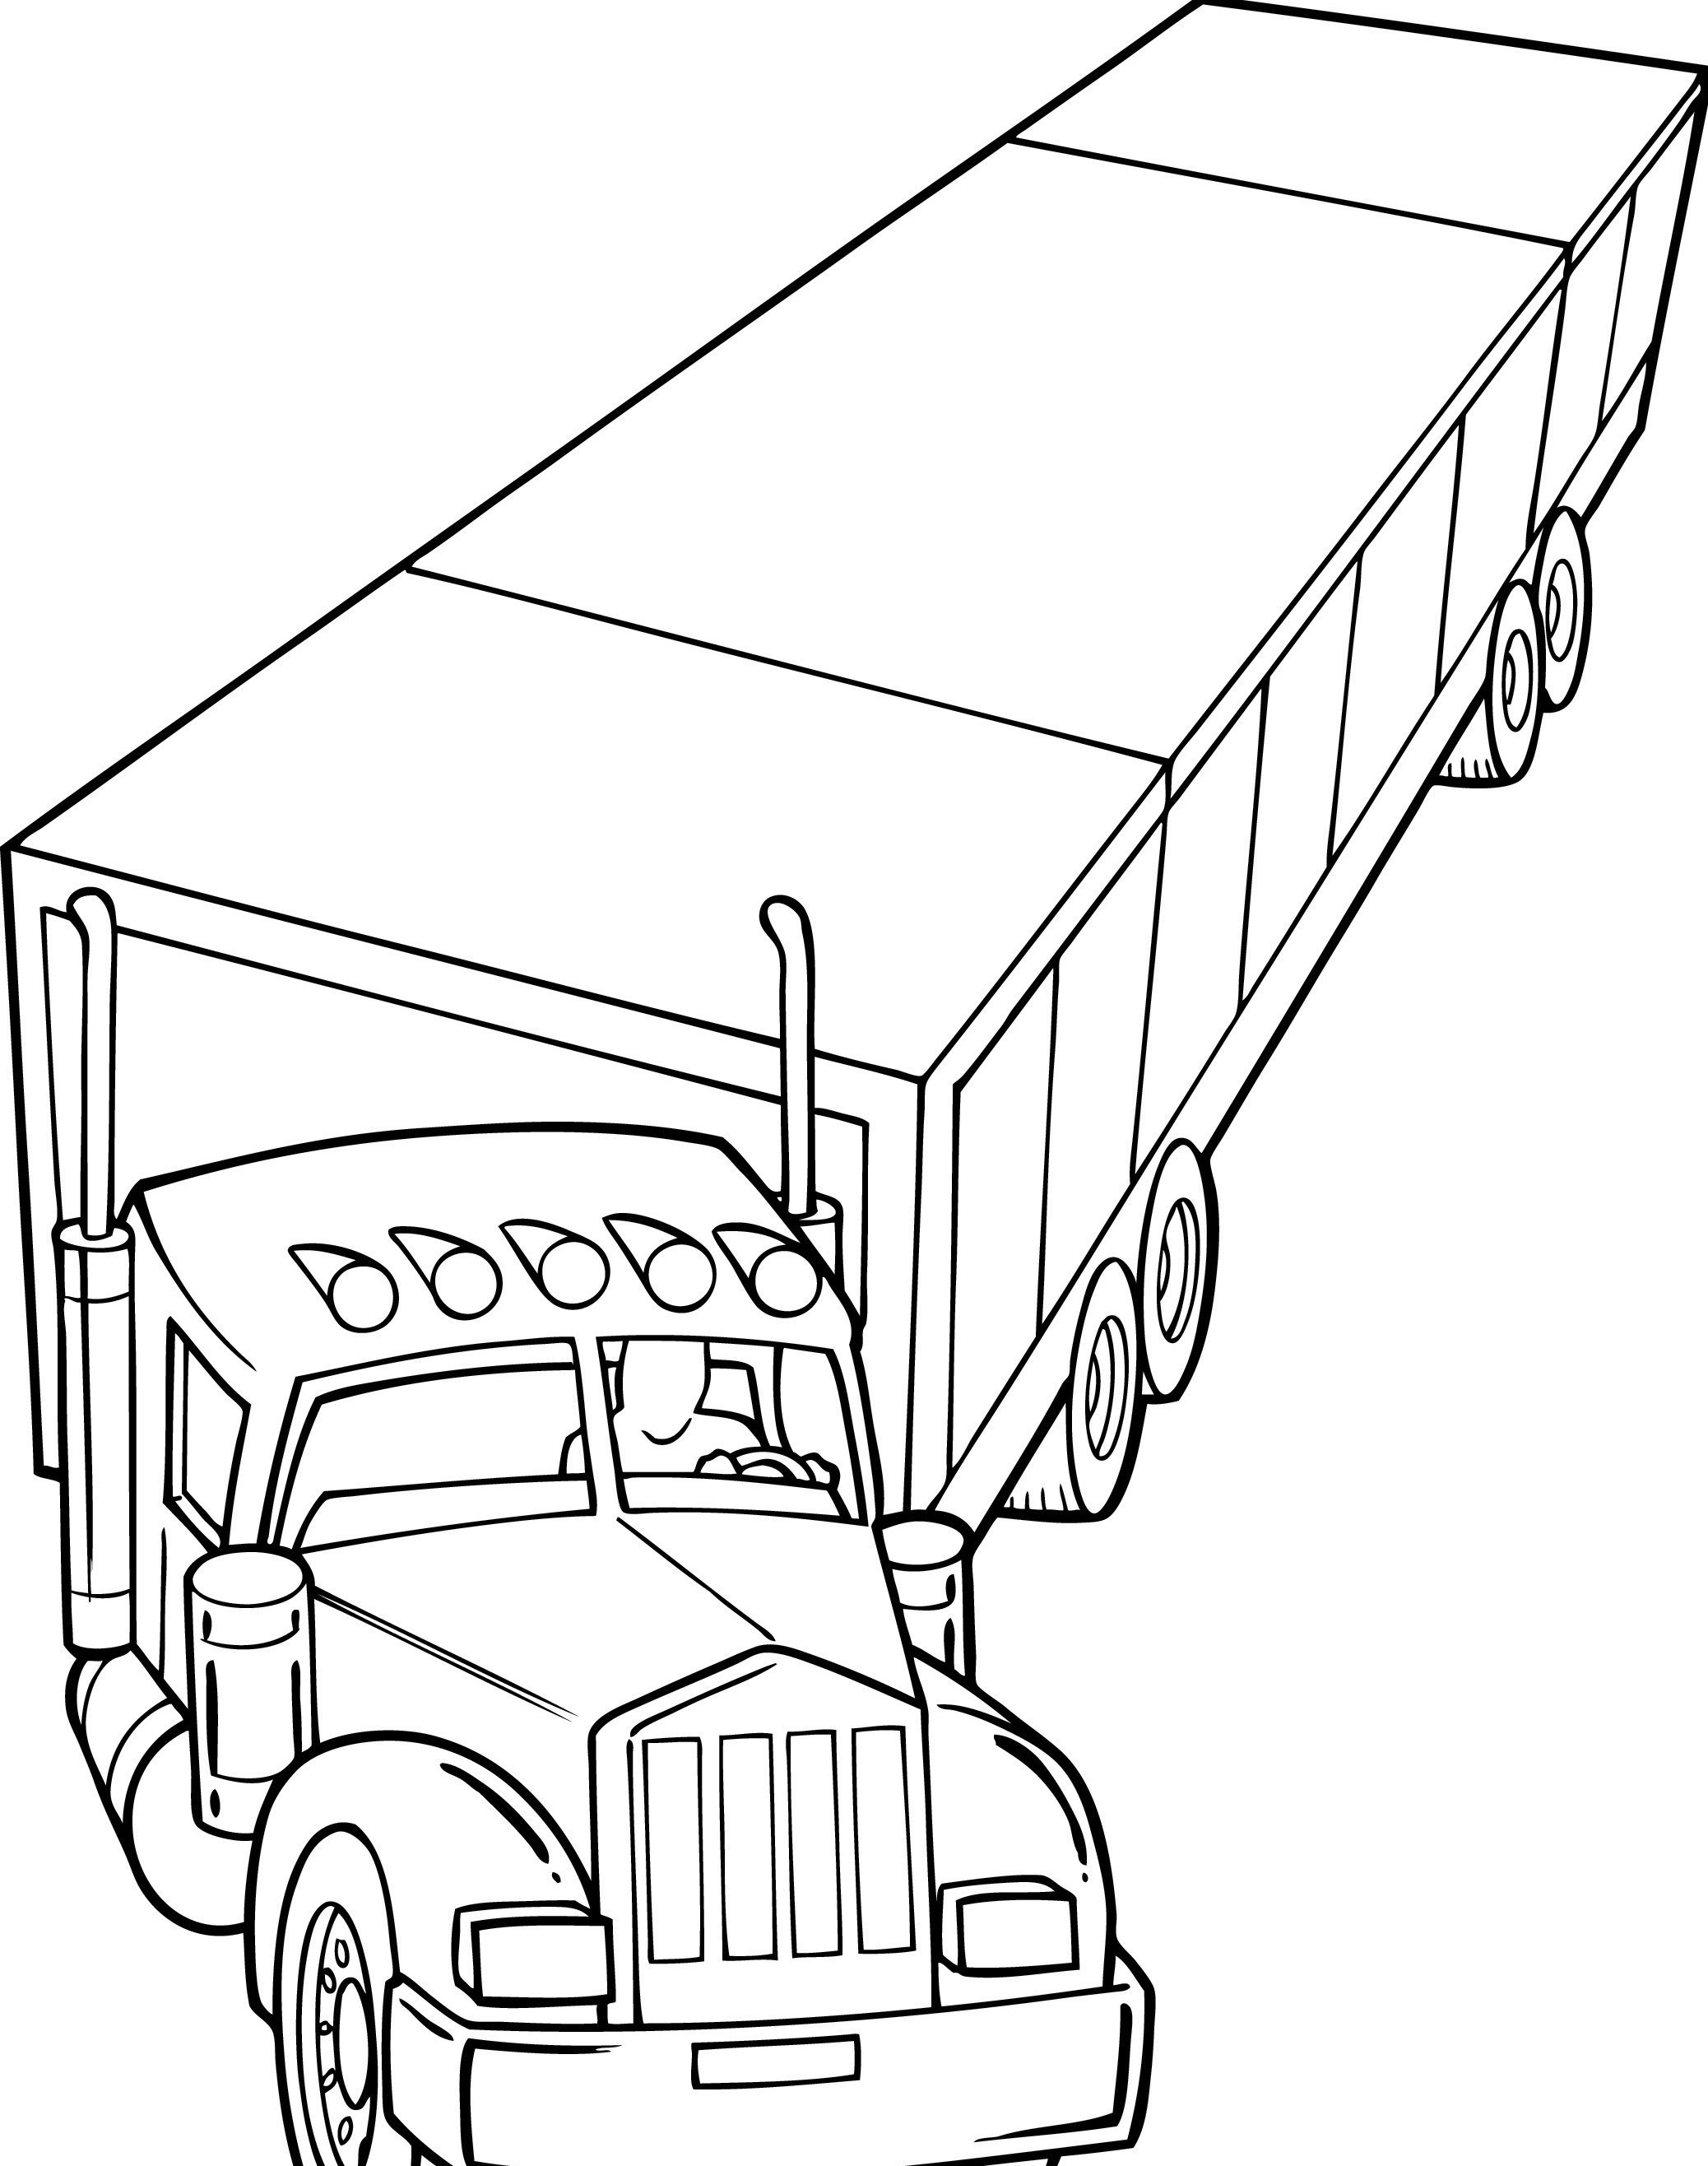 Farm Truck Coloring Pages - Get Coloring Pages